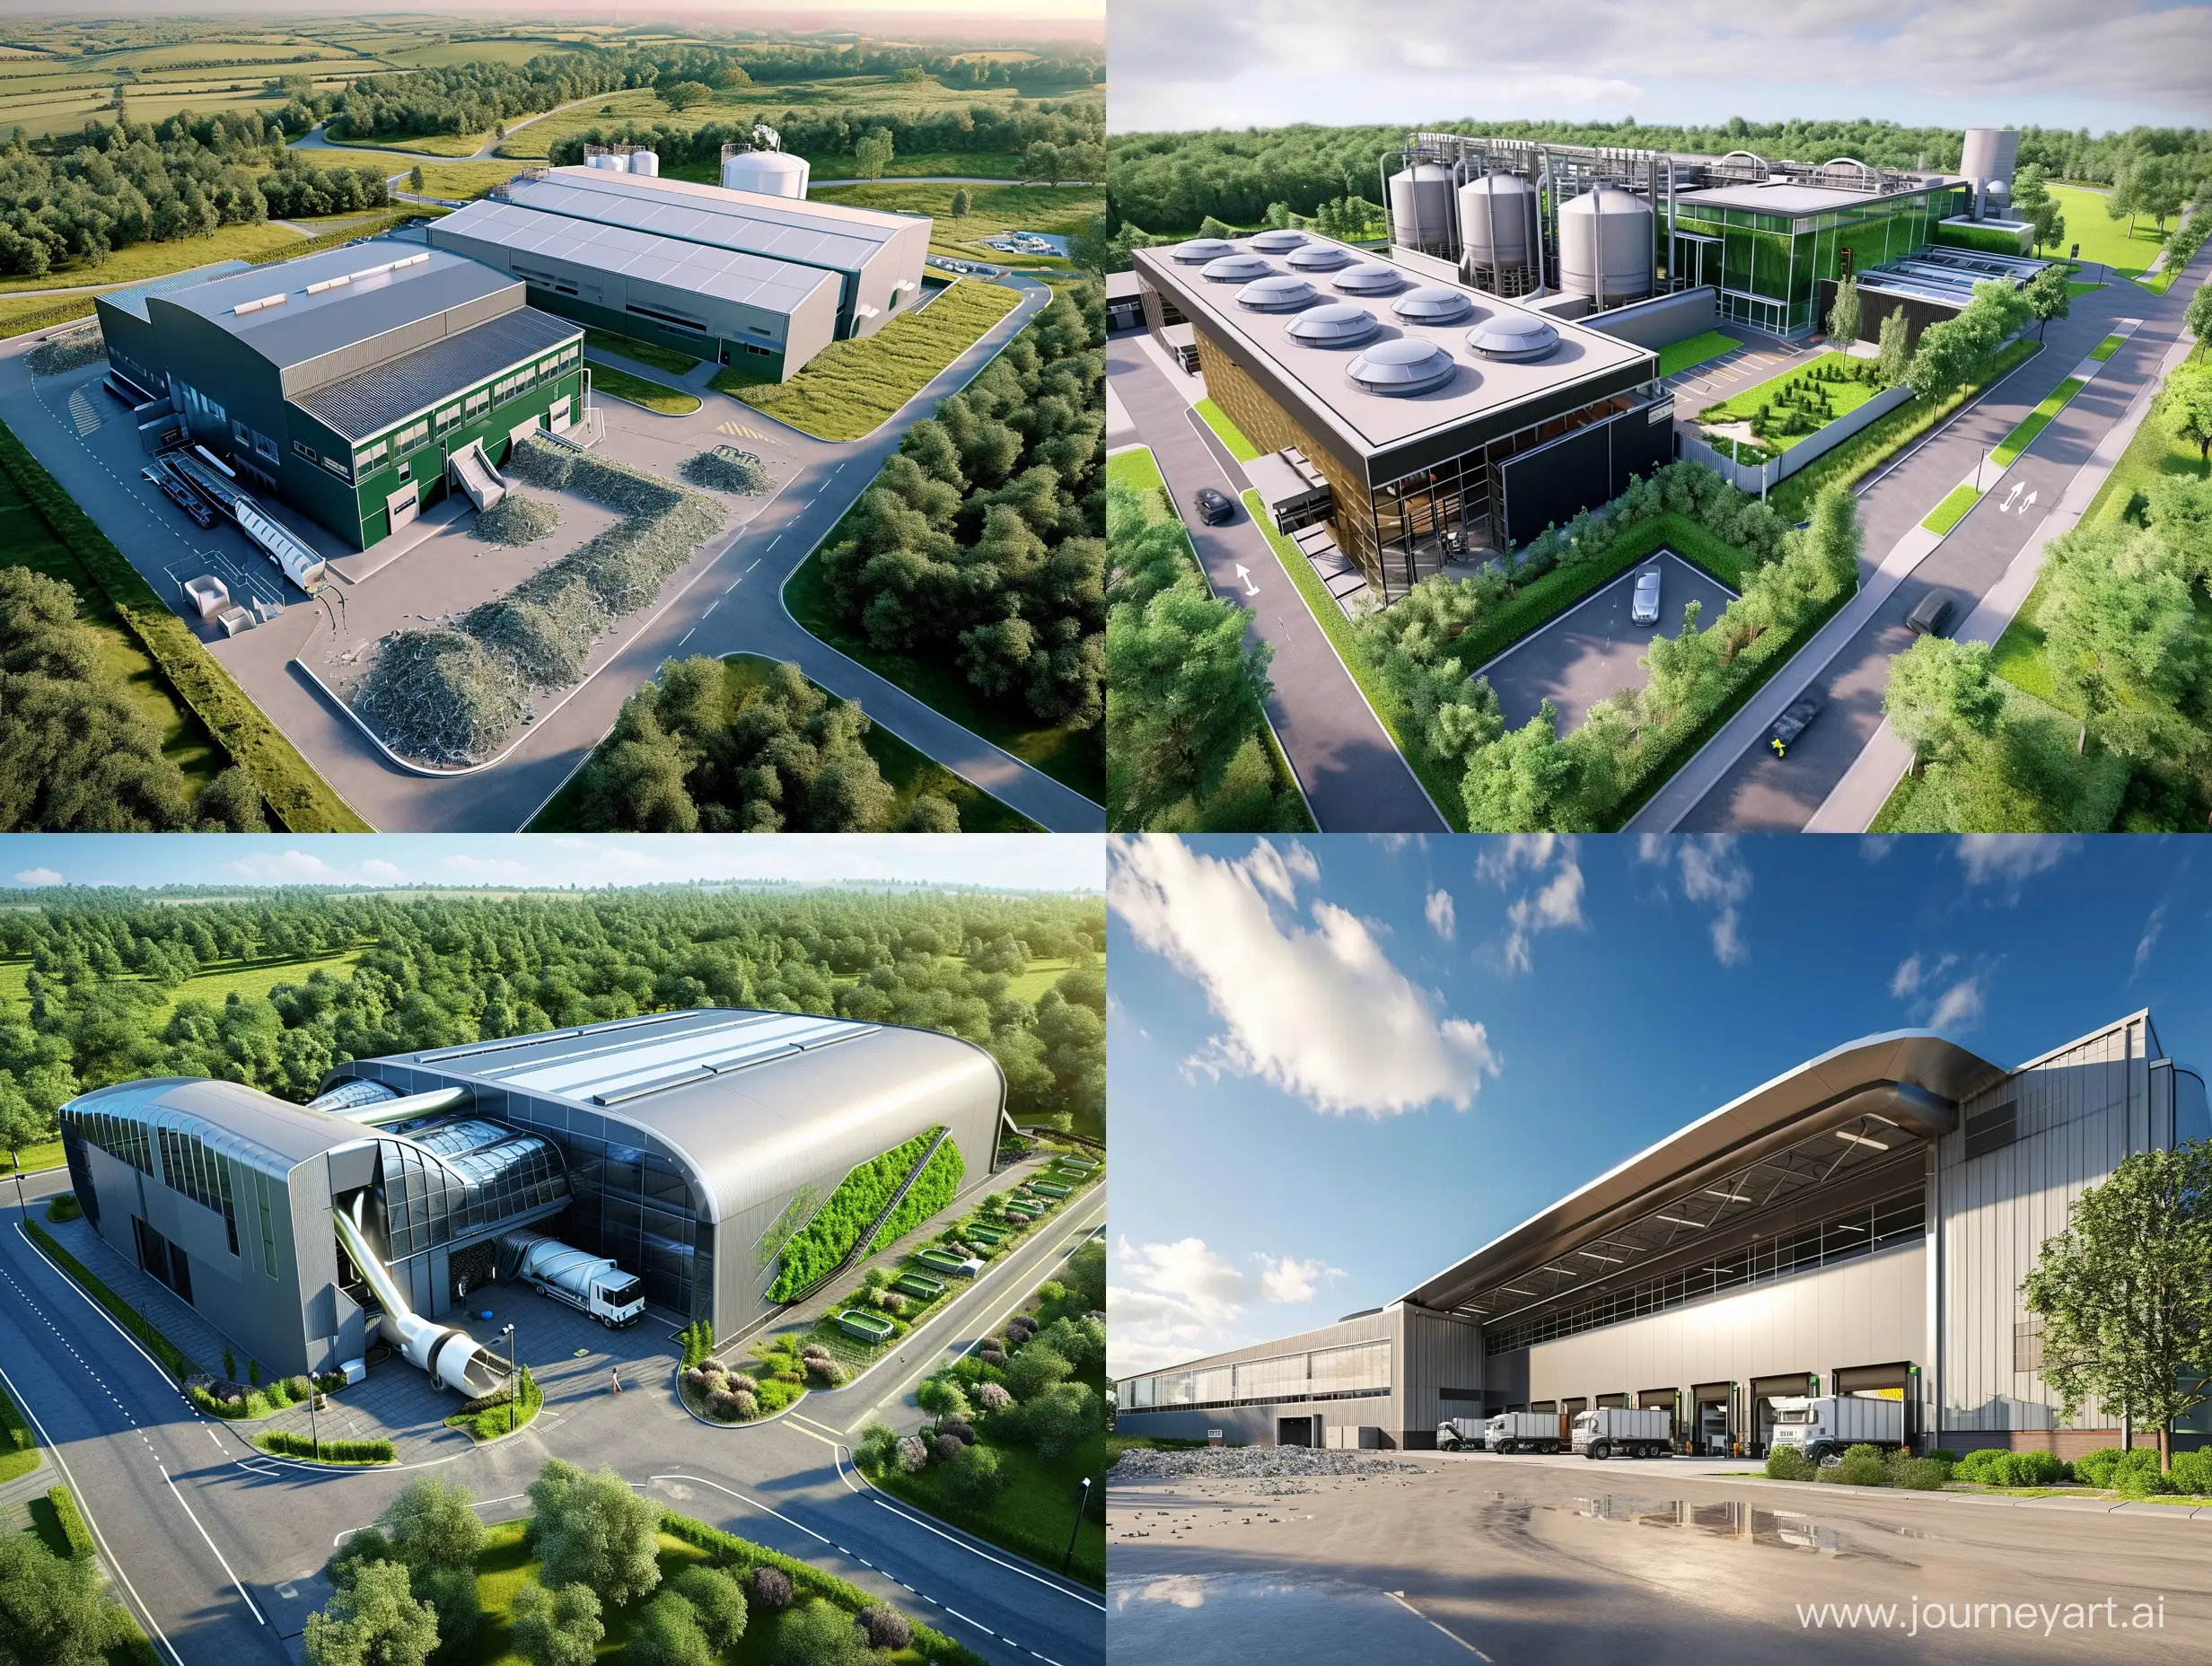 Futuristic-Food-Waste-Processing-at-UK-Recycling-Company-Building